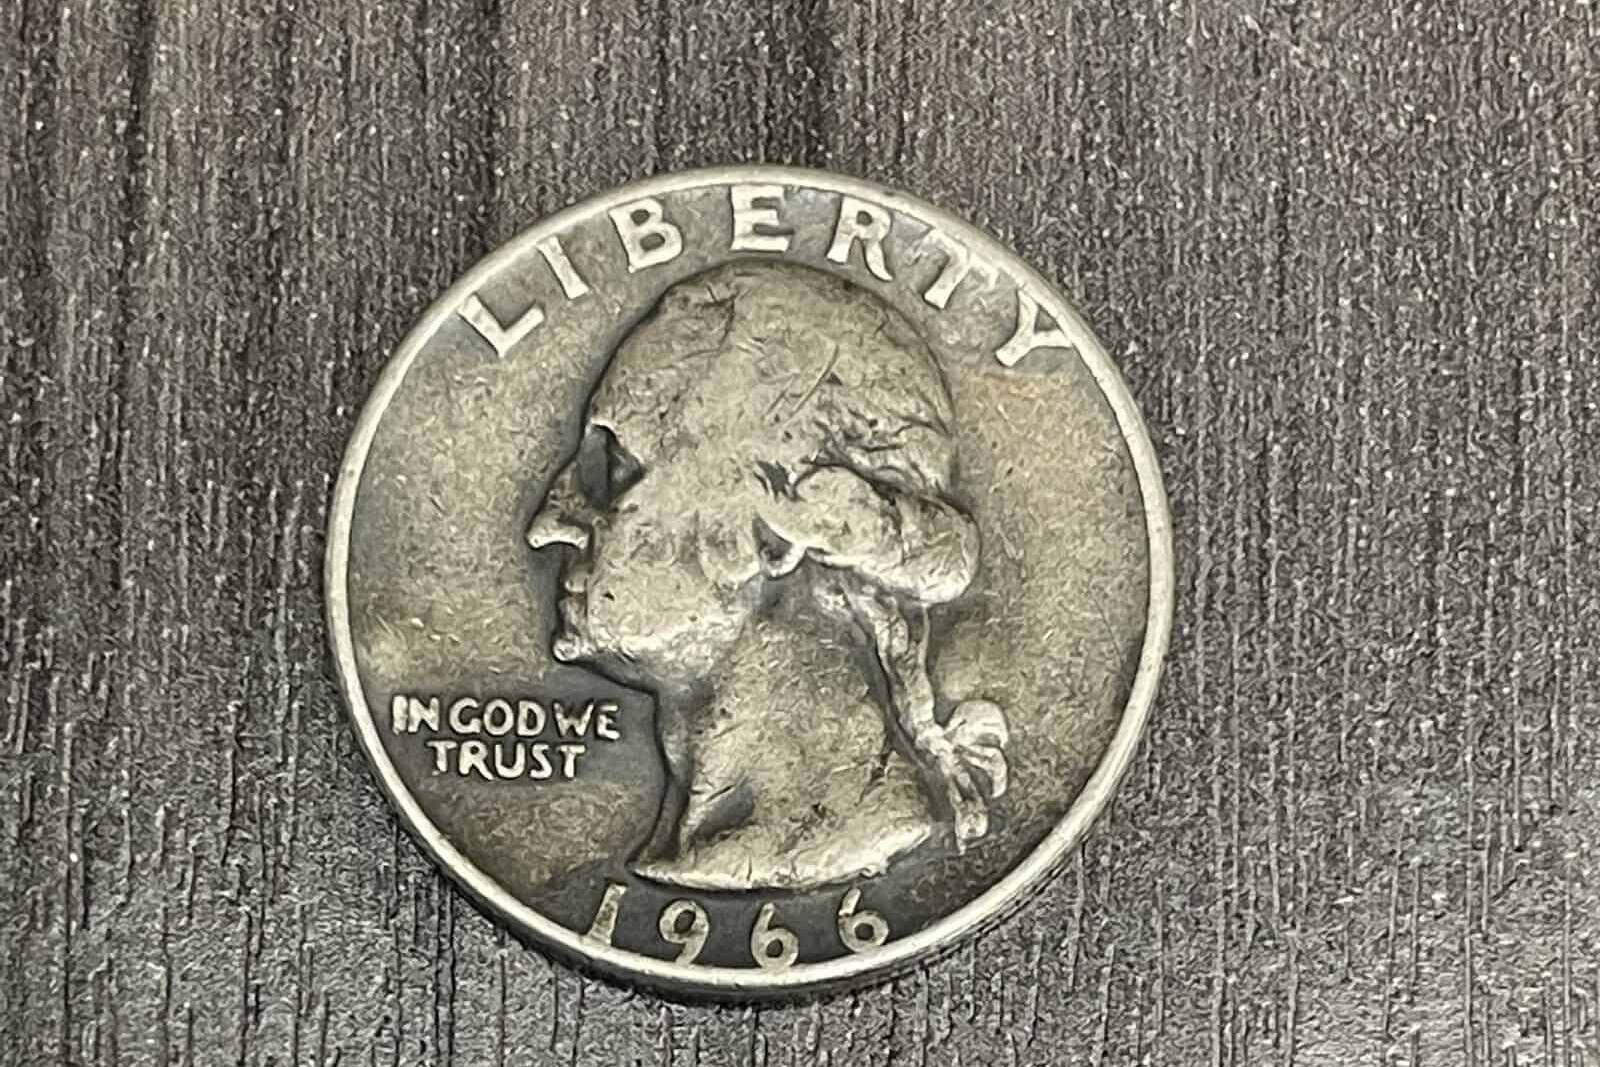 The Surprising Value Of A Quarter Without A Mint Mark